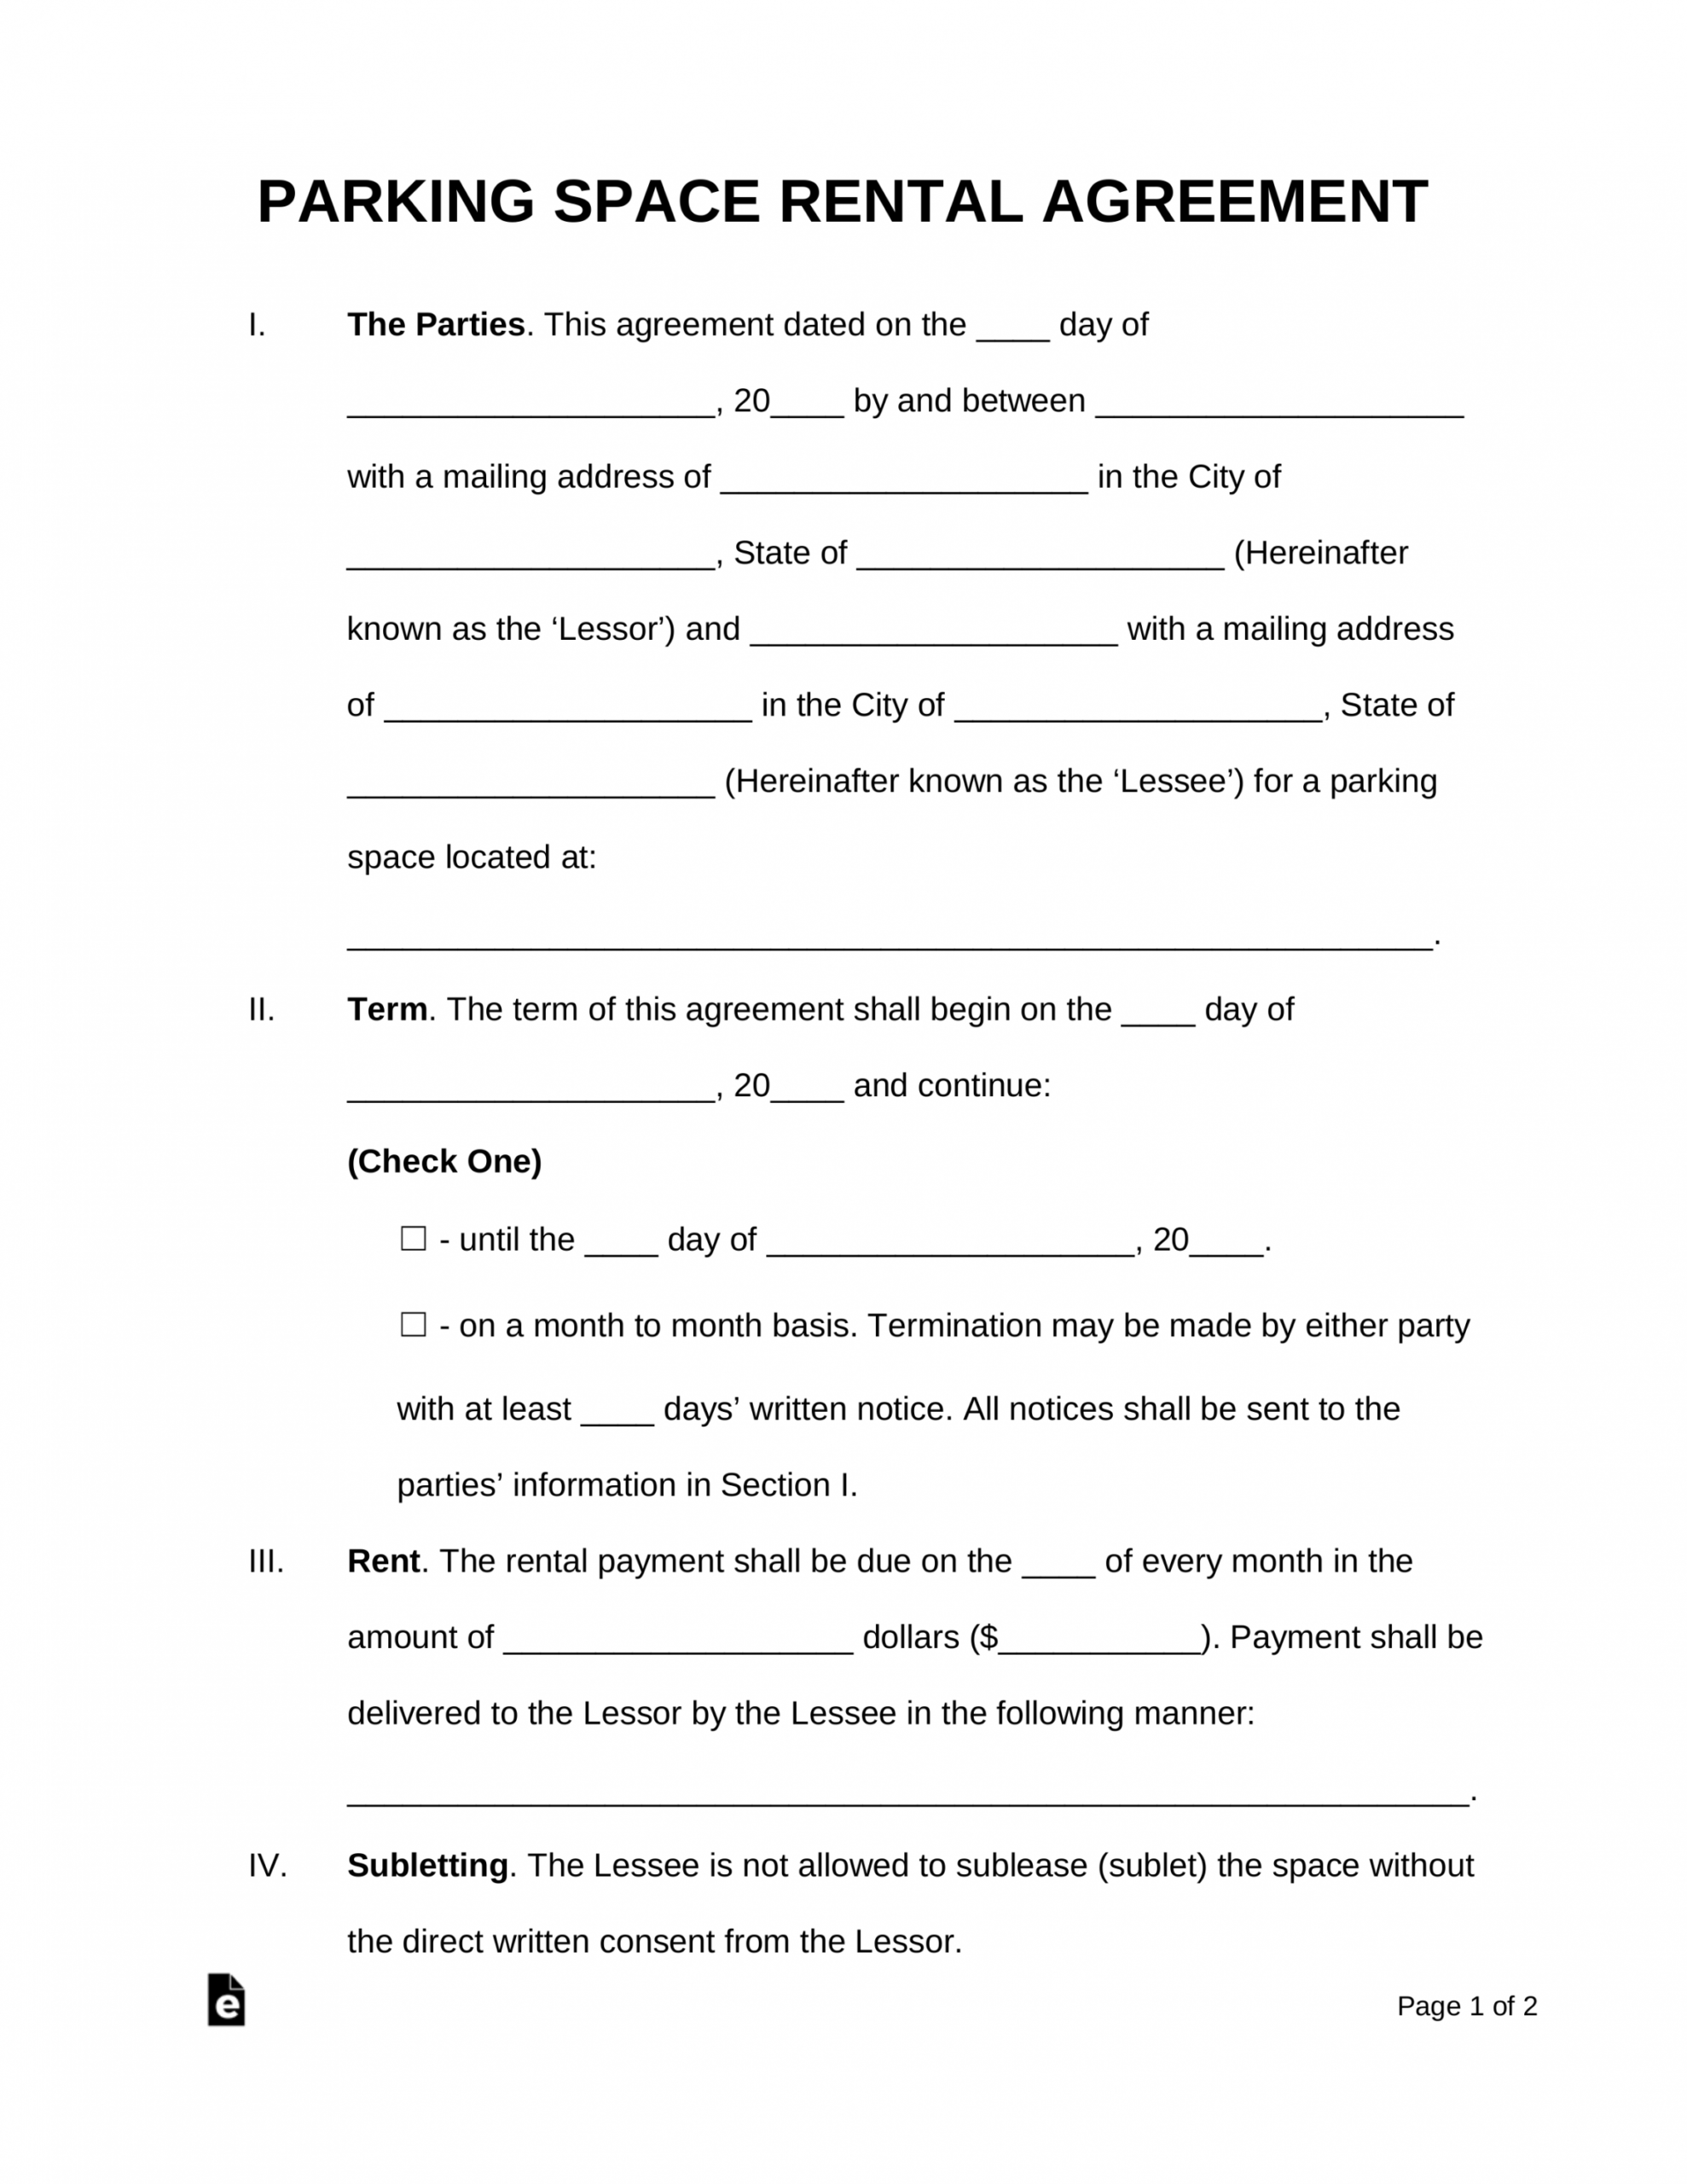 free free parking space rental lease agreement template  pdf parking space rental agreement template